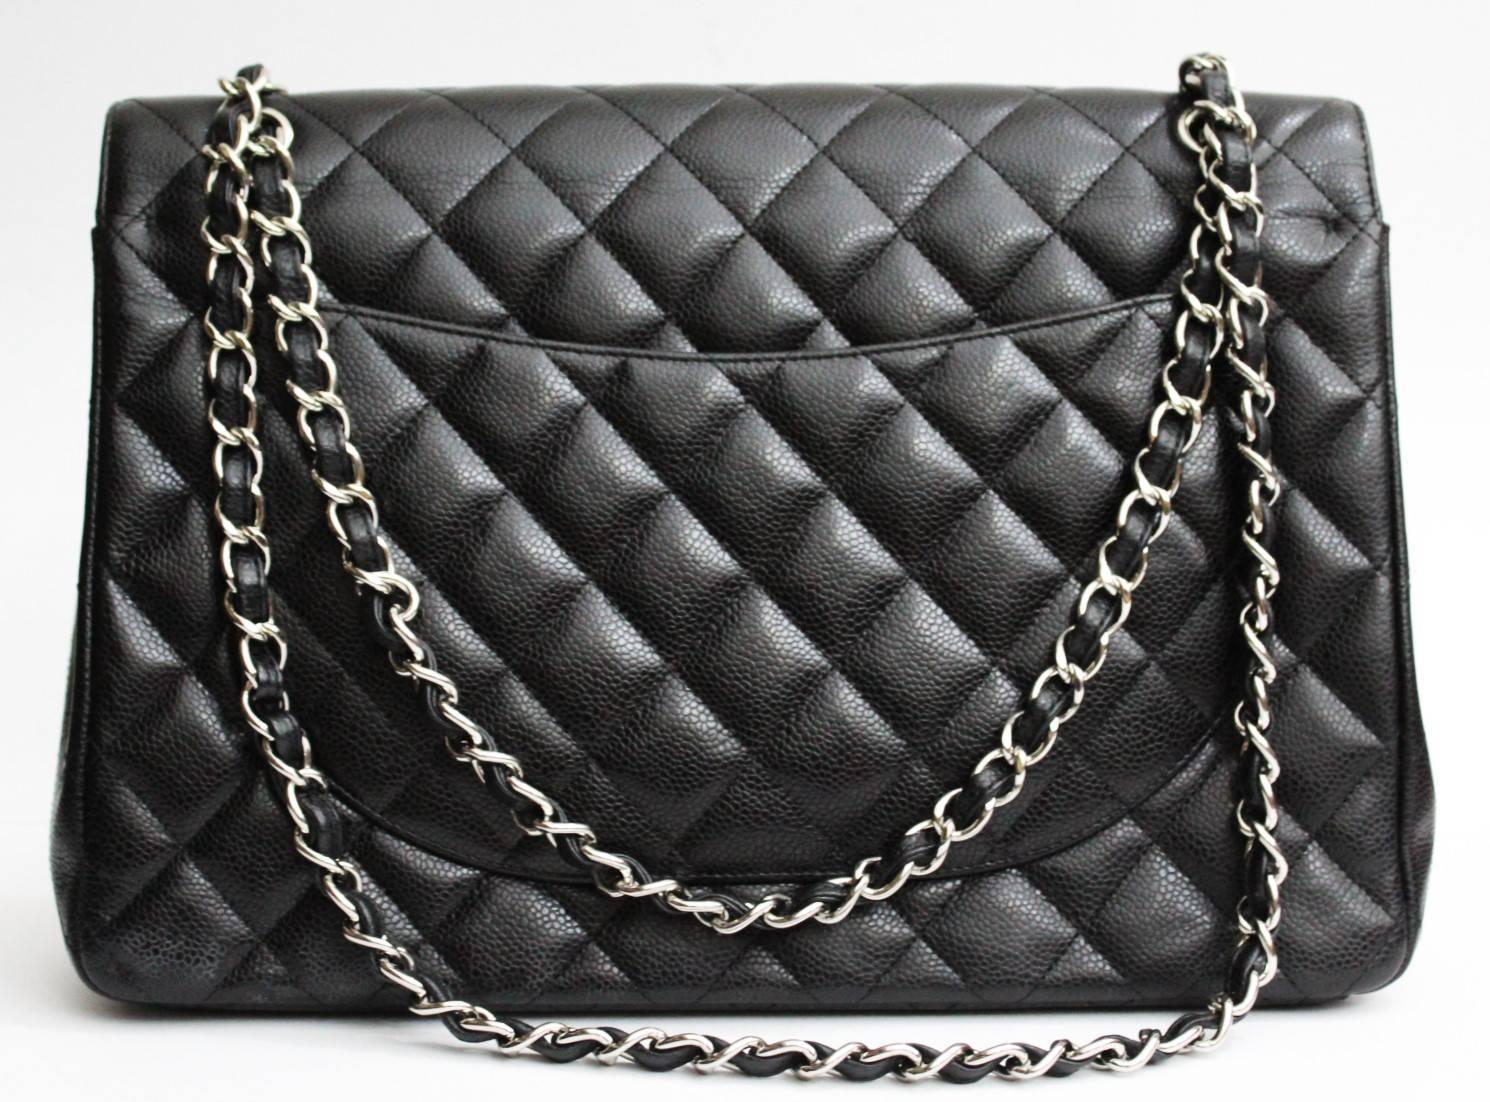 The most famous Chanel in the world is here! Chanel Classic Maxi Jumbo with the hammered leather and silver hardware . The year is 2011. Excelent conditions with box and card.